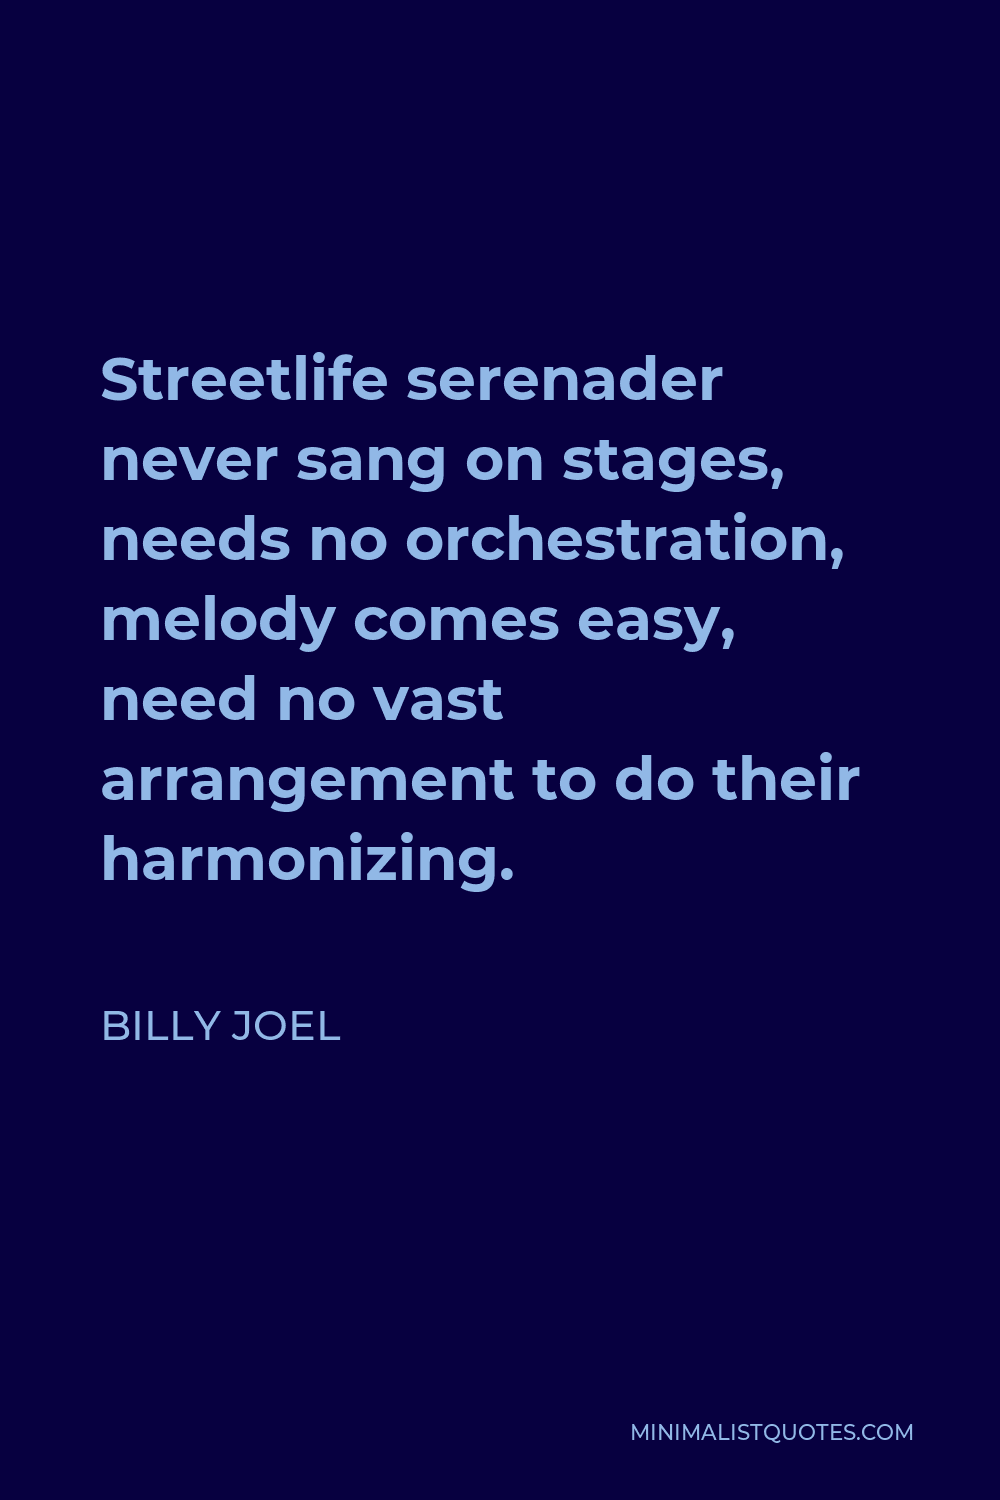 Billy Joel Quote - Streetlife serenader never sang on stages, needs no orchestration, melody comes easy, need no vast arrangement to do their harmonizing.